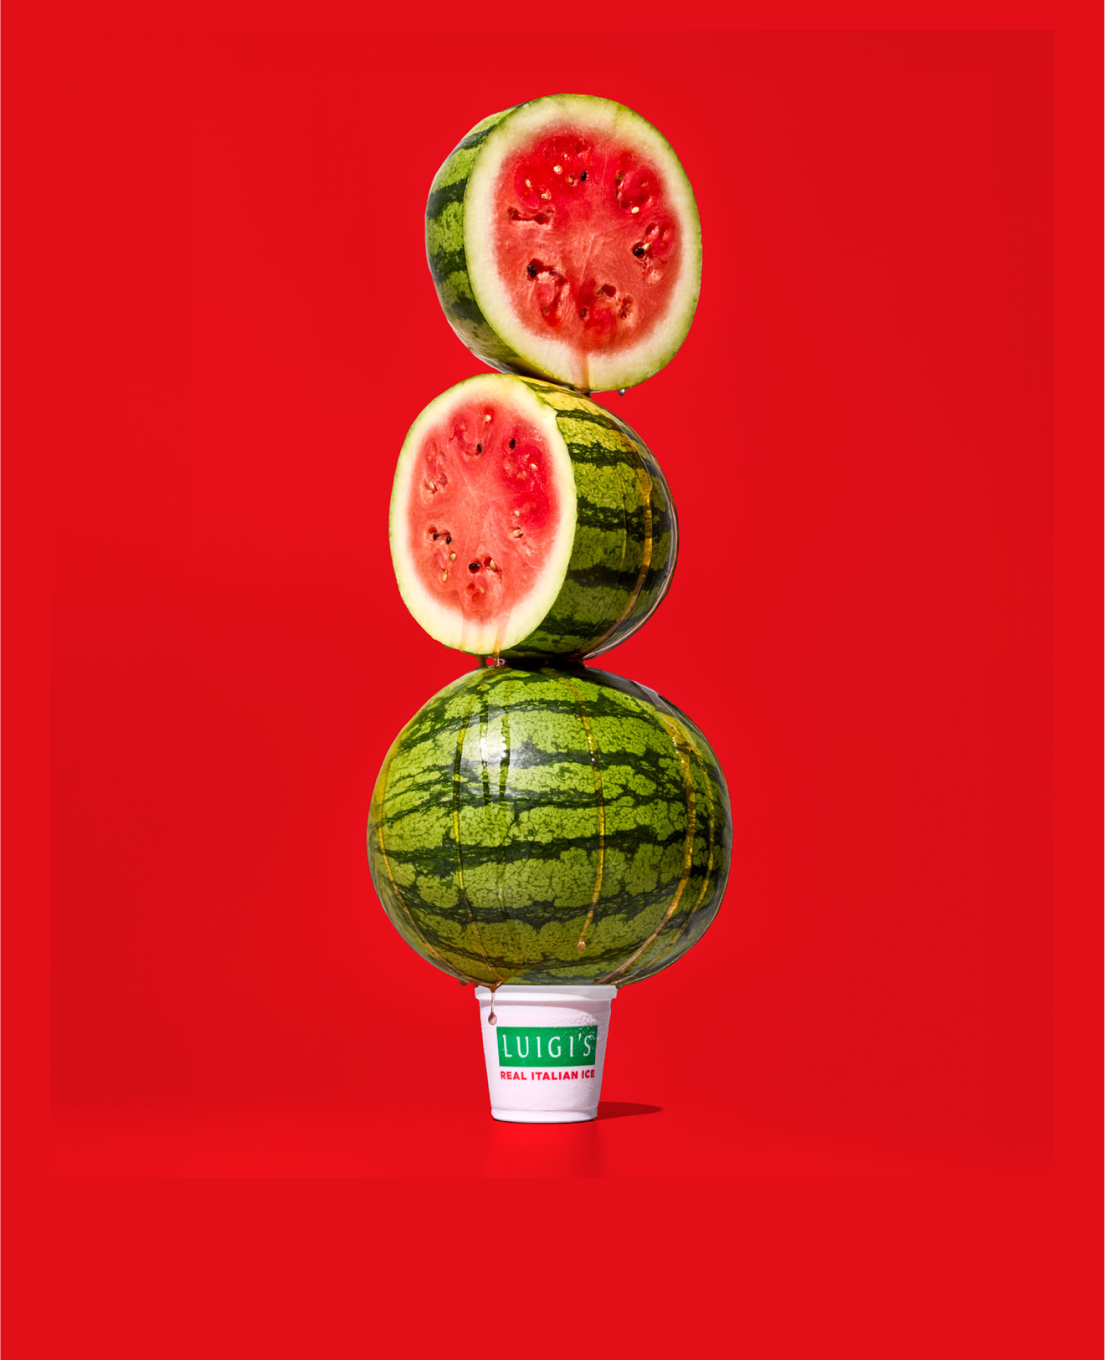 Image of watermelons stacked on top of a cup of LUIGI'S Real Italian Ice. The background is red.